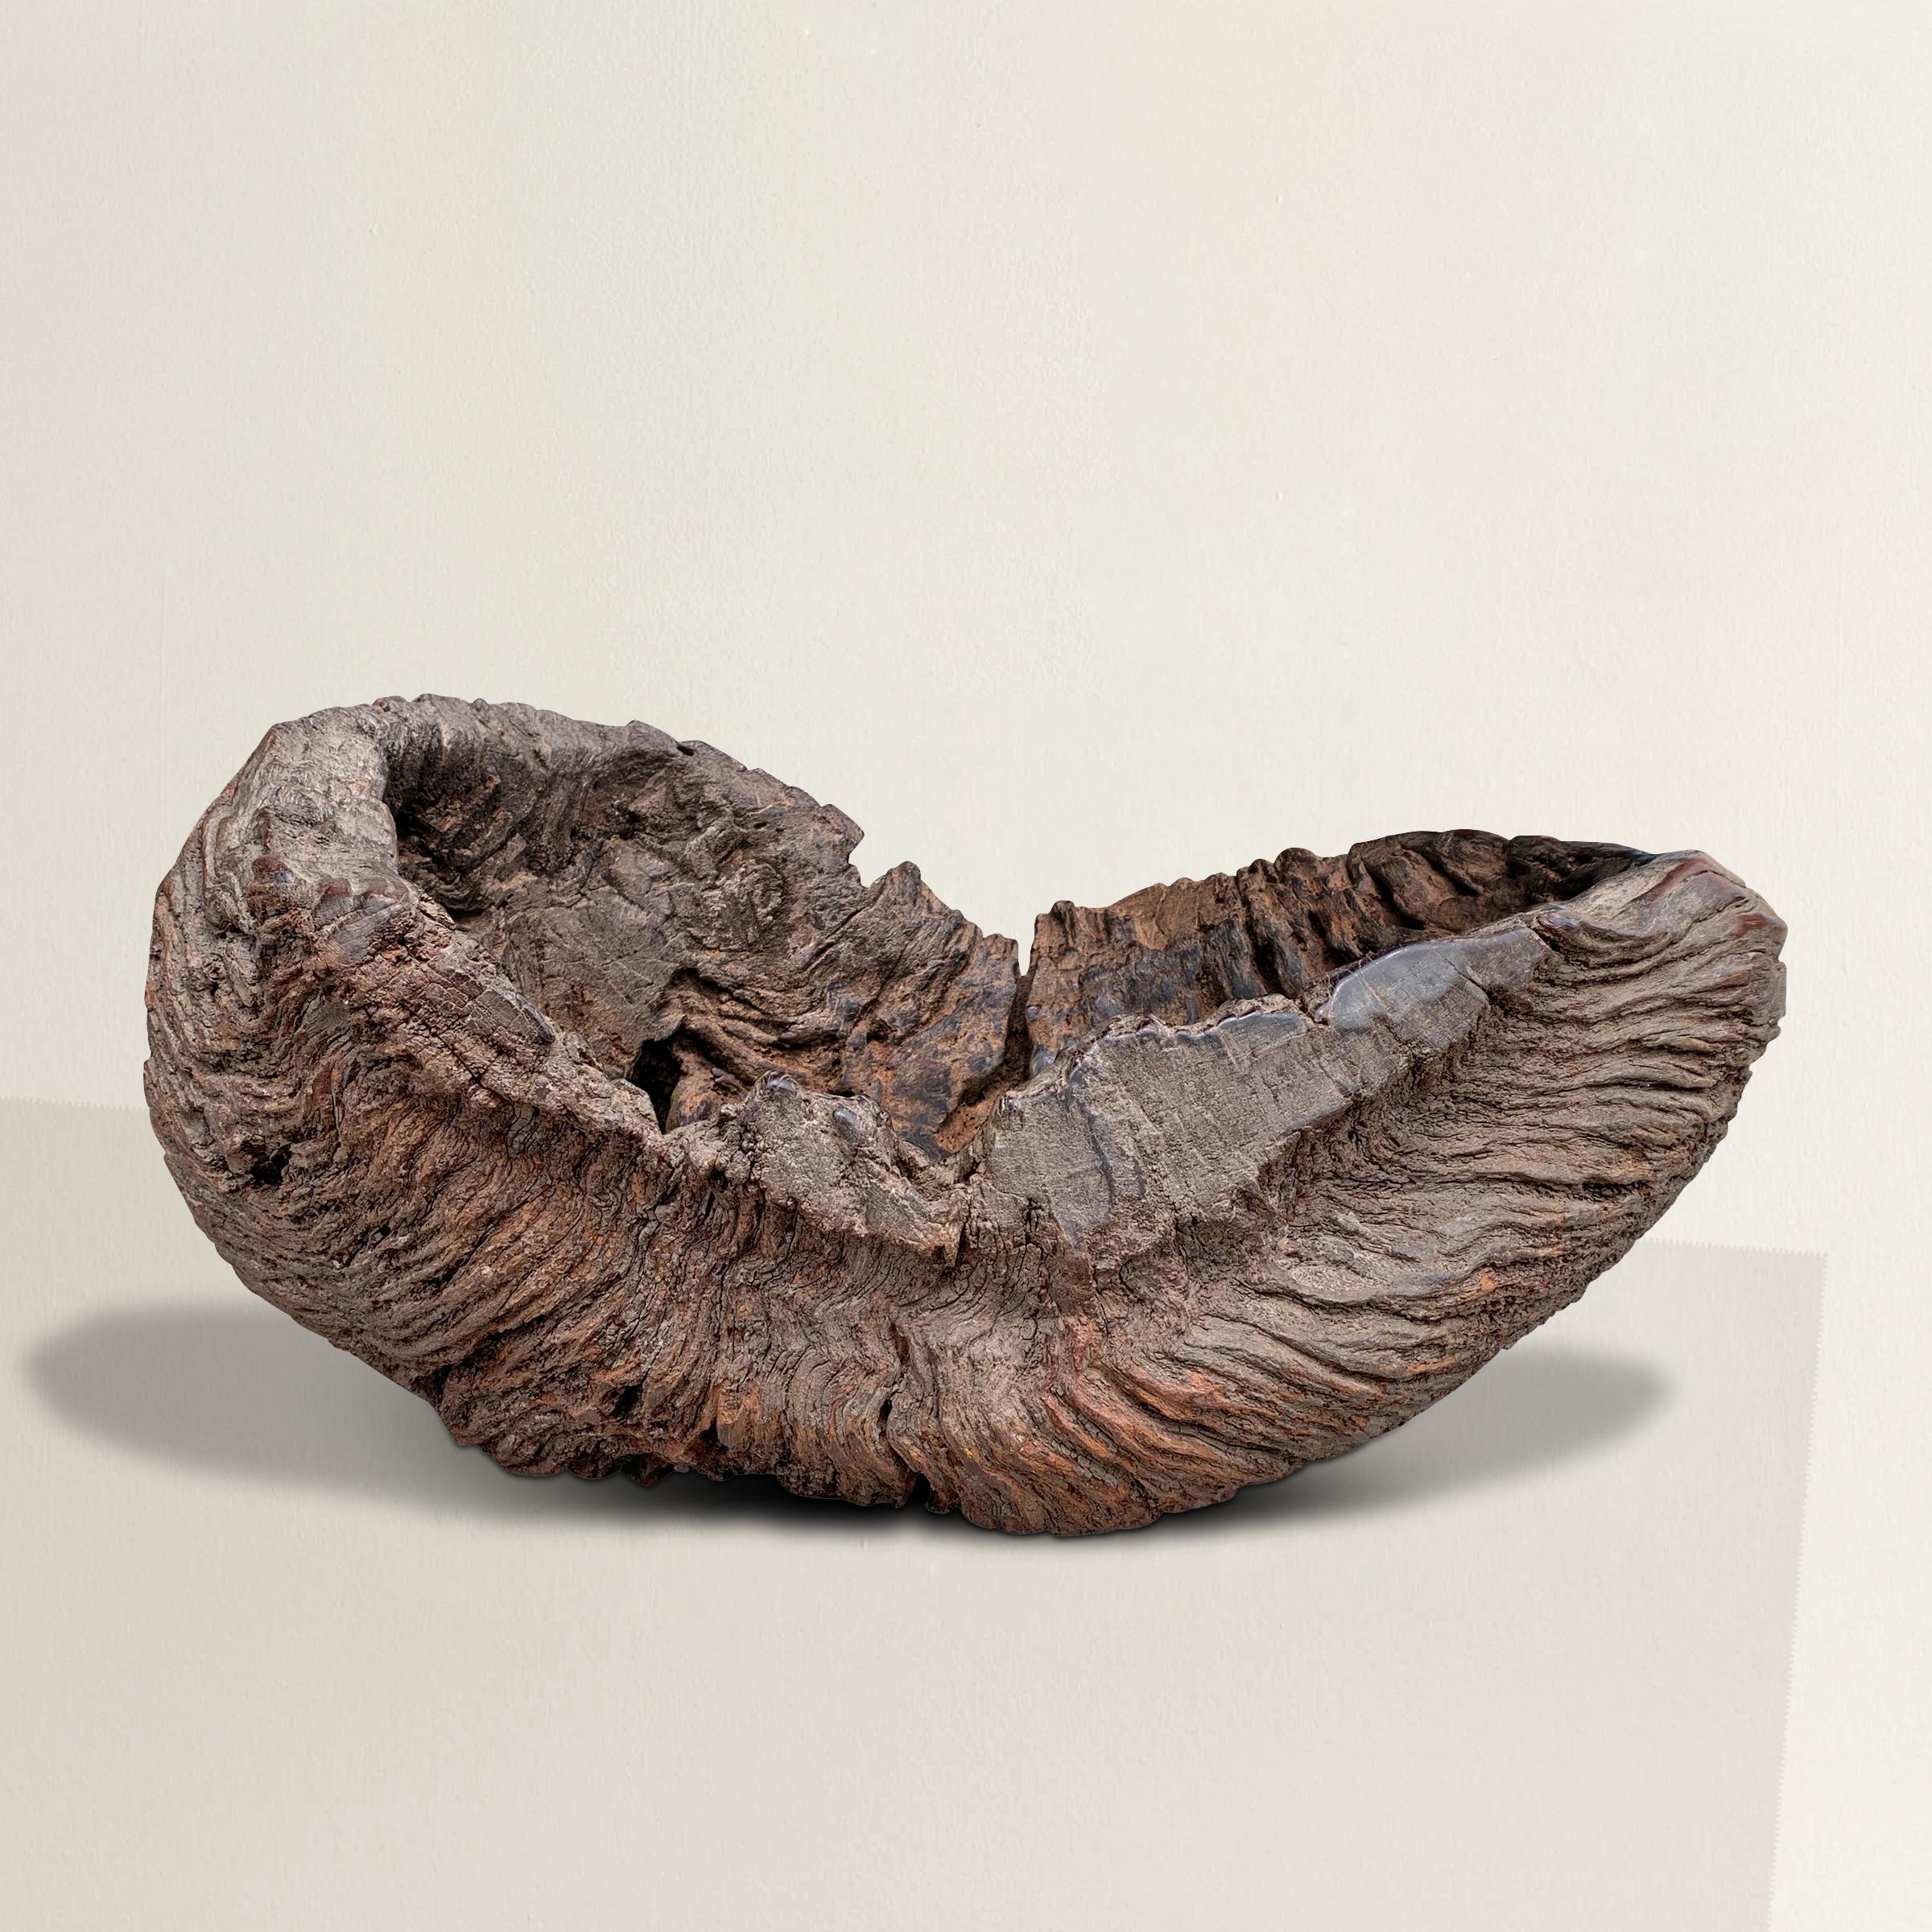 Behold the best burl wood bowl you've ever seen, a magnificent testament to the passage of time and the artistry of nature. This remarkable piece boasts a patina that only decades, perhaps even centuries, could bestow. With its intriguing history